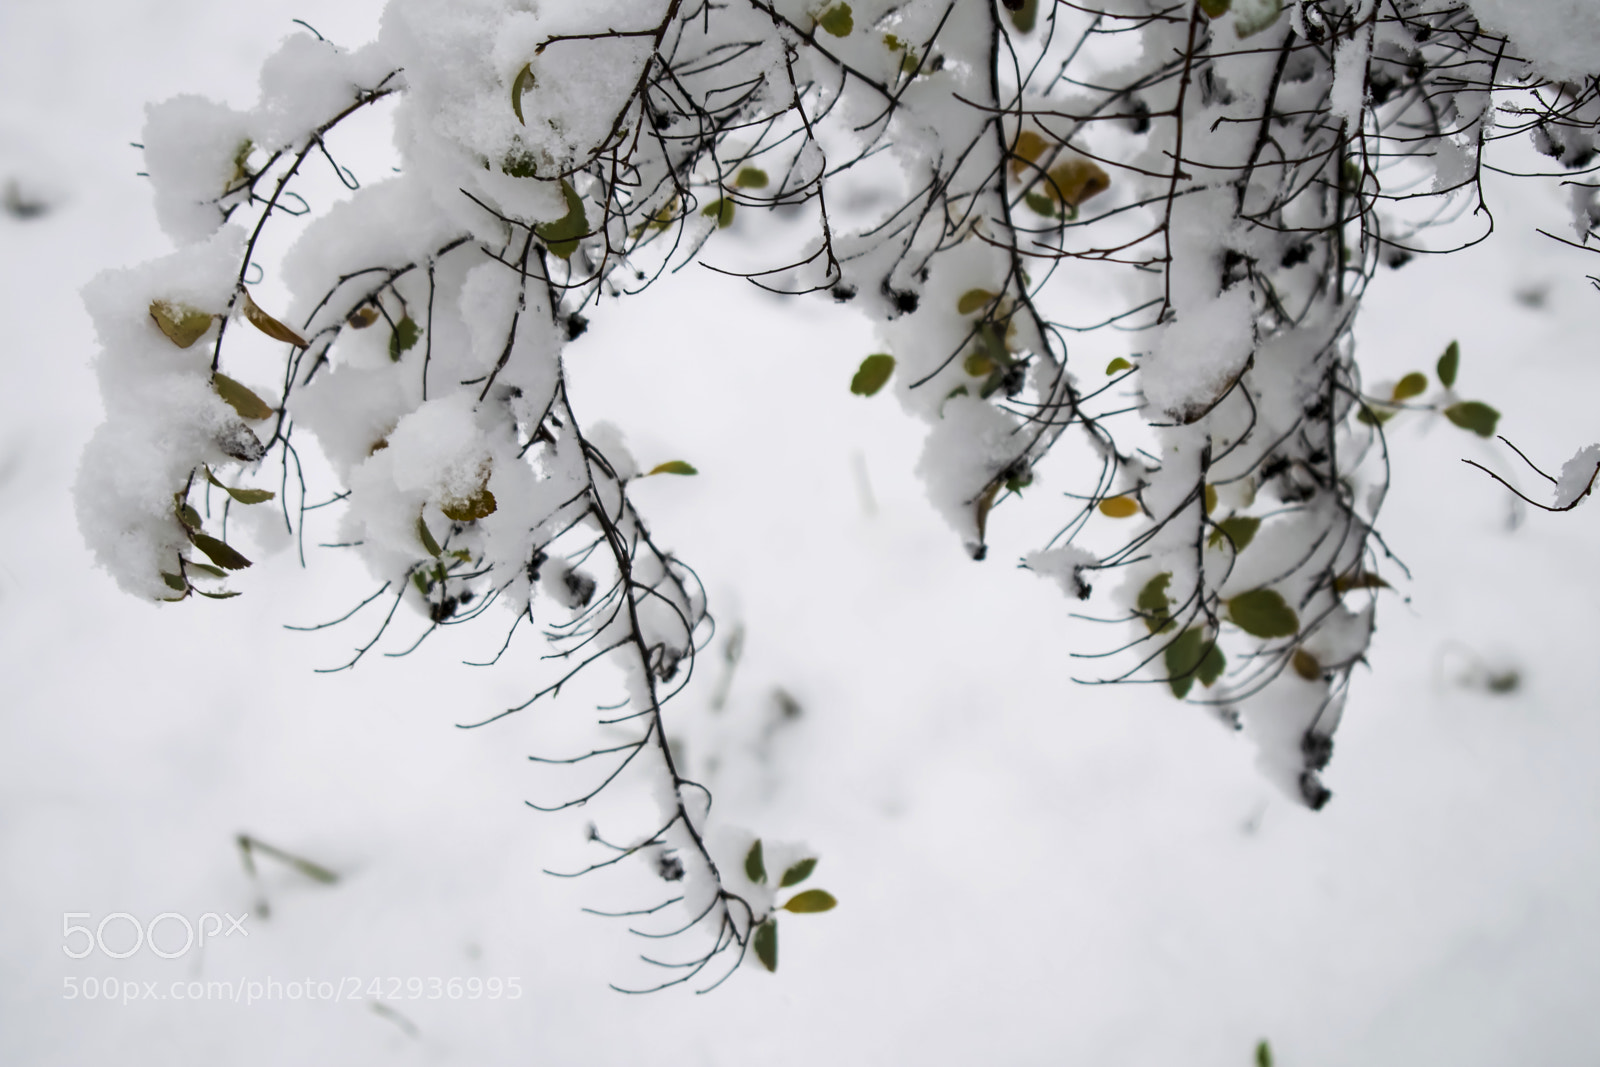 Nikon D3300 sample photo. Winter snow branches on photography